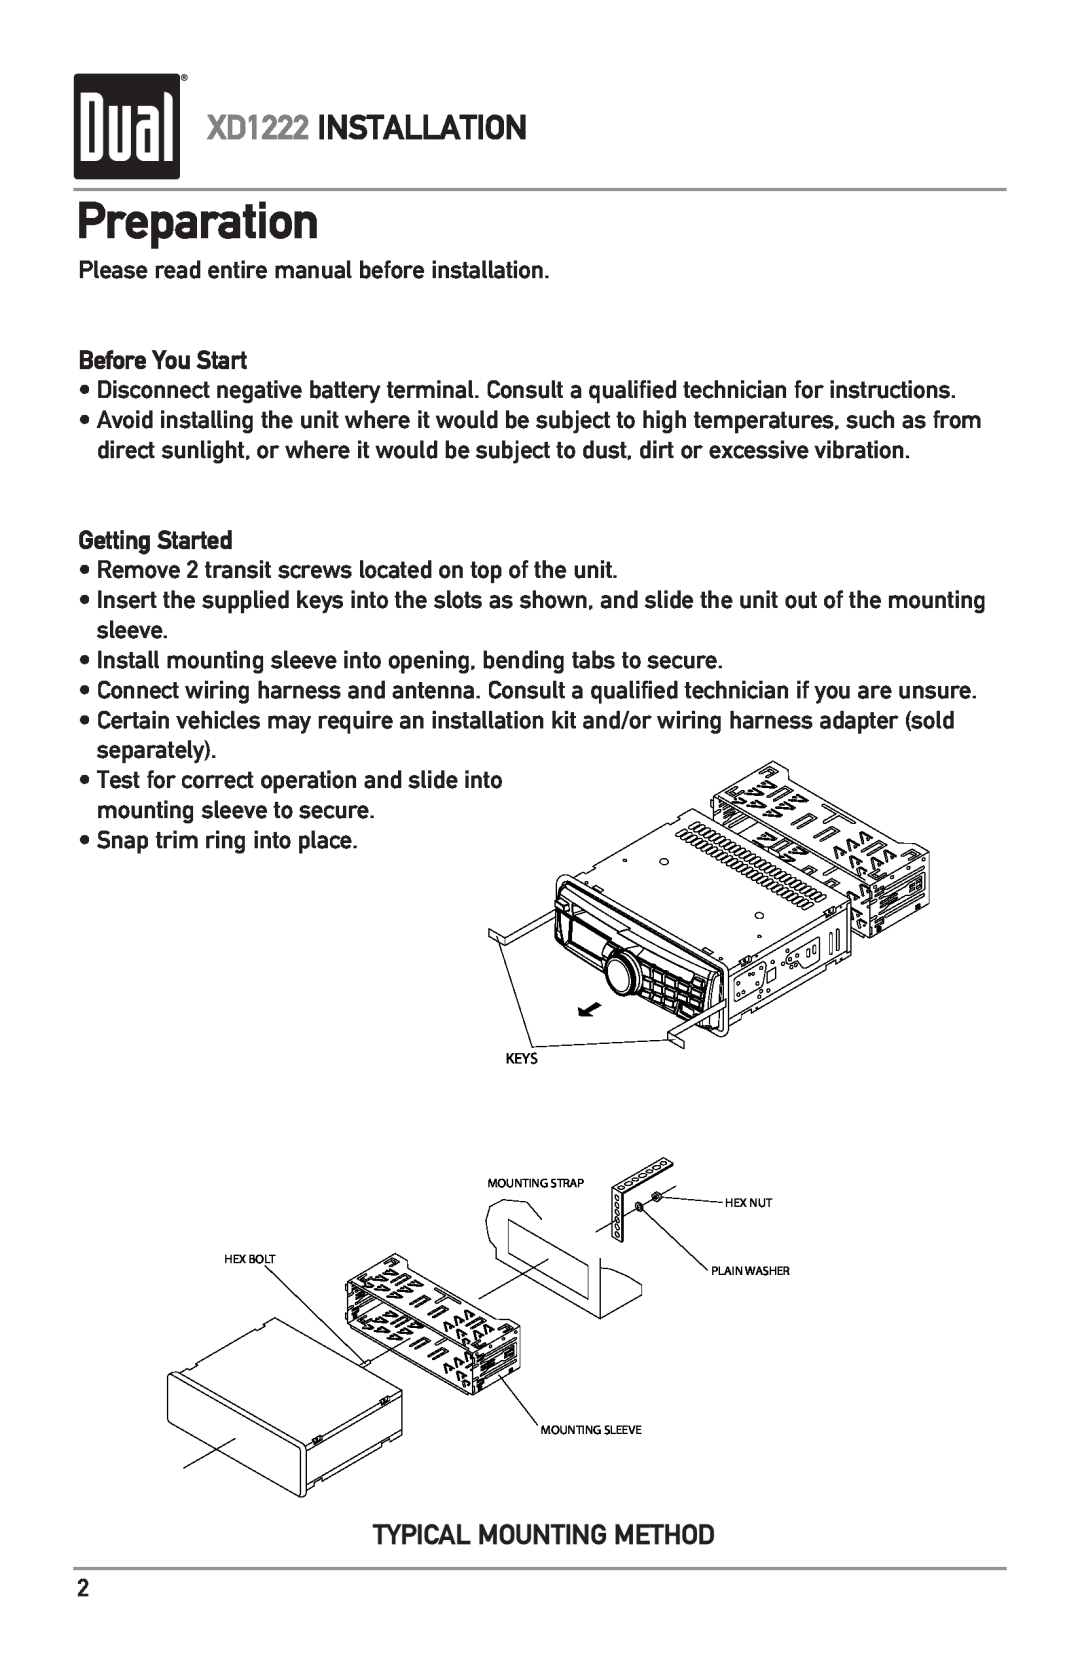 Dual owner manual Preparation, XD1222 INSTALLATION, Typical Mounting Method, Before You Start, Getting Started 